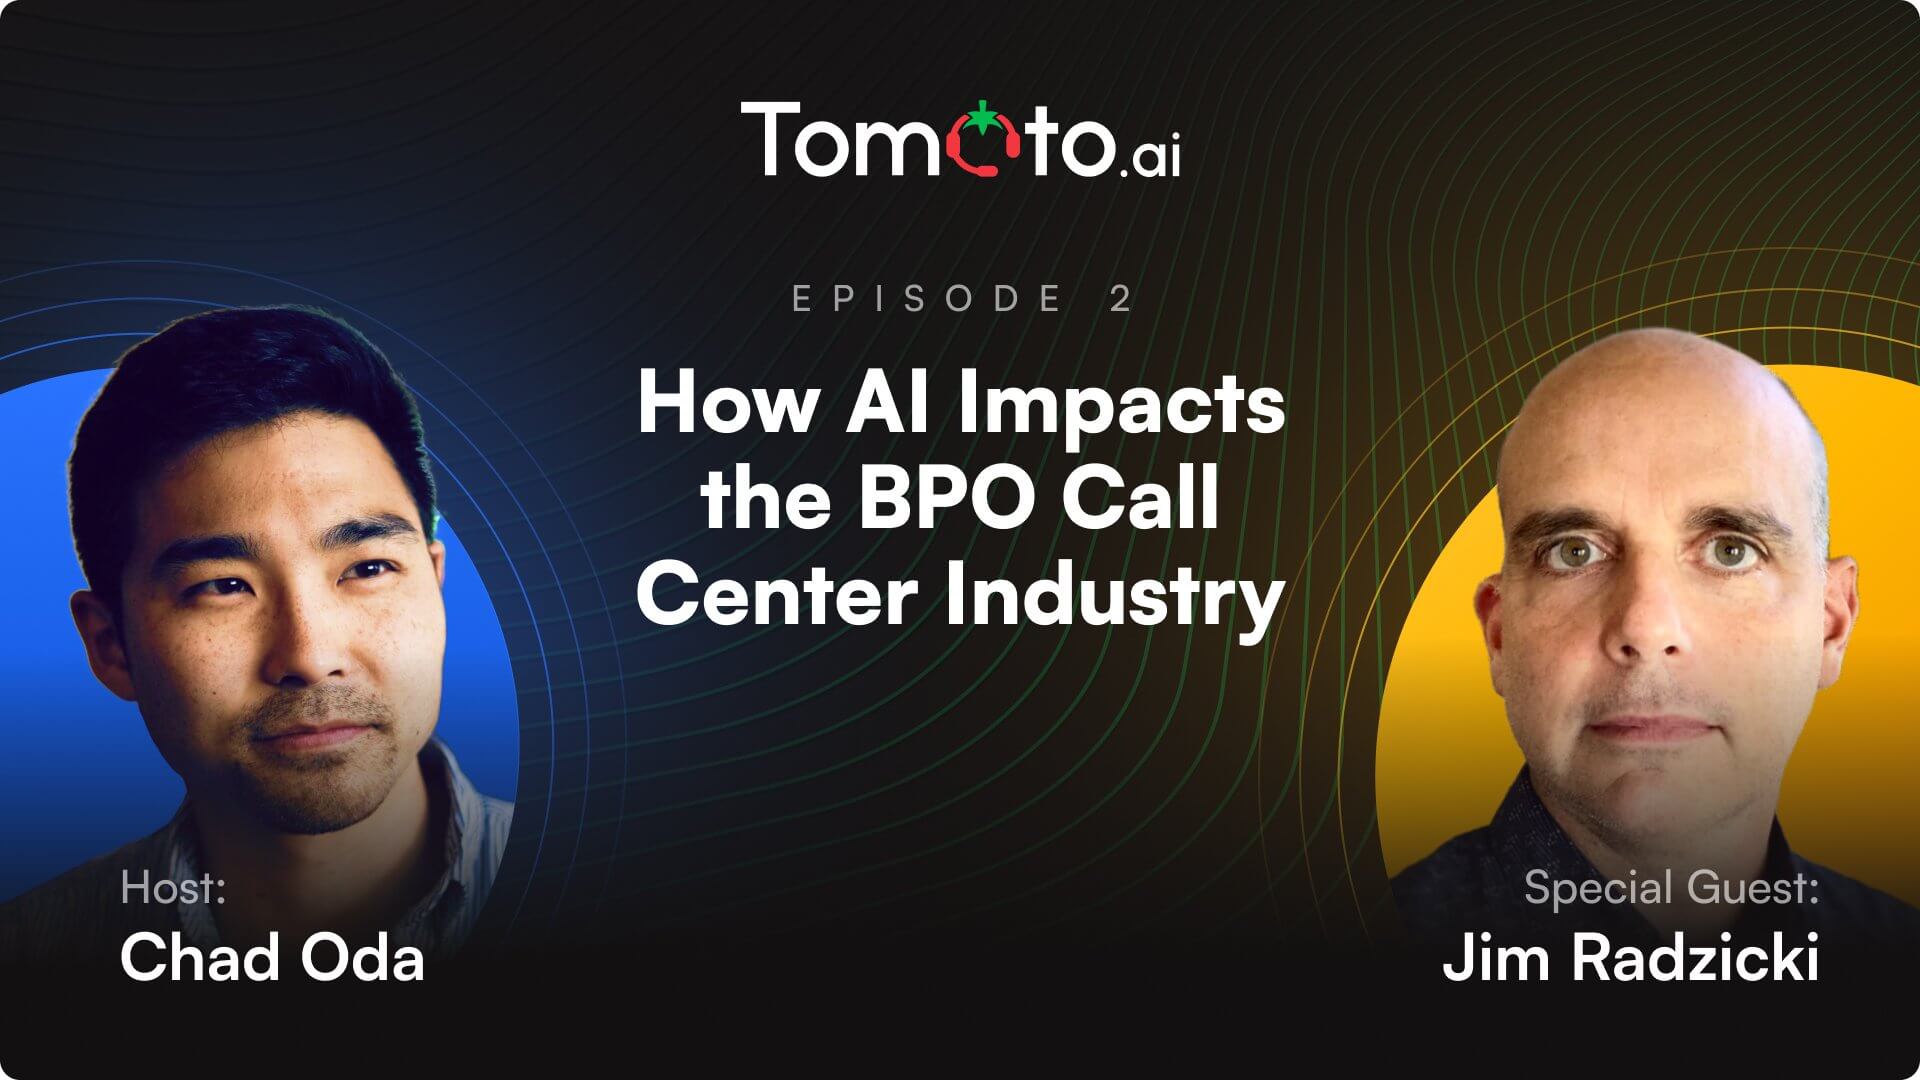 The Impact of AI on the BPO Call Center Industry